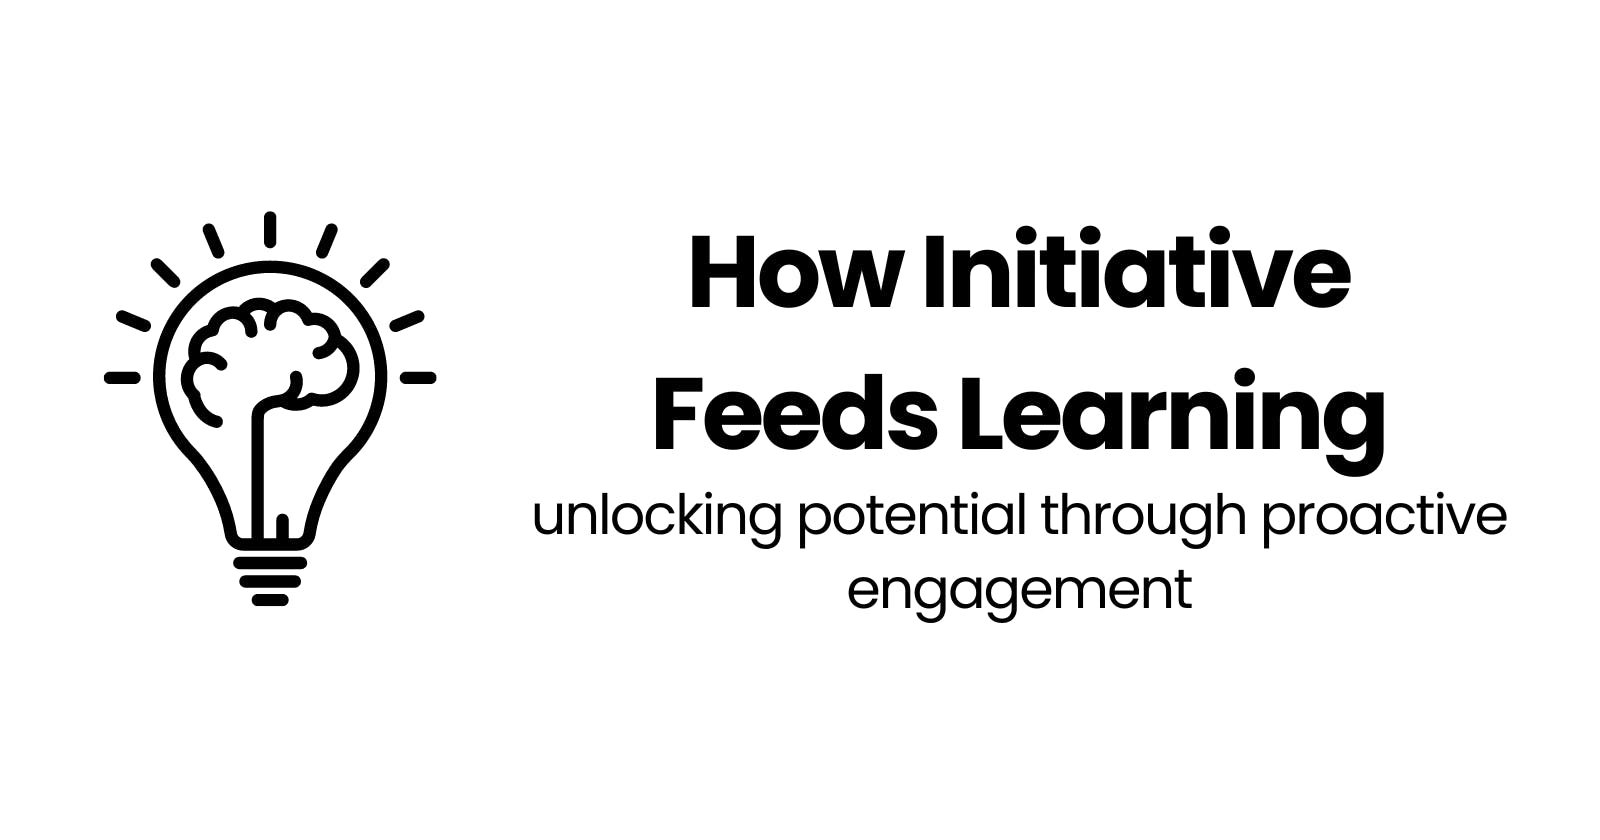 How Initiative Feeds Learning